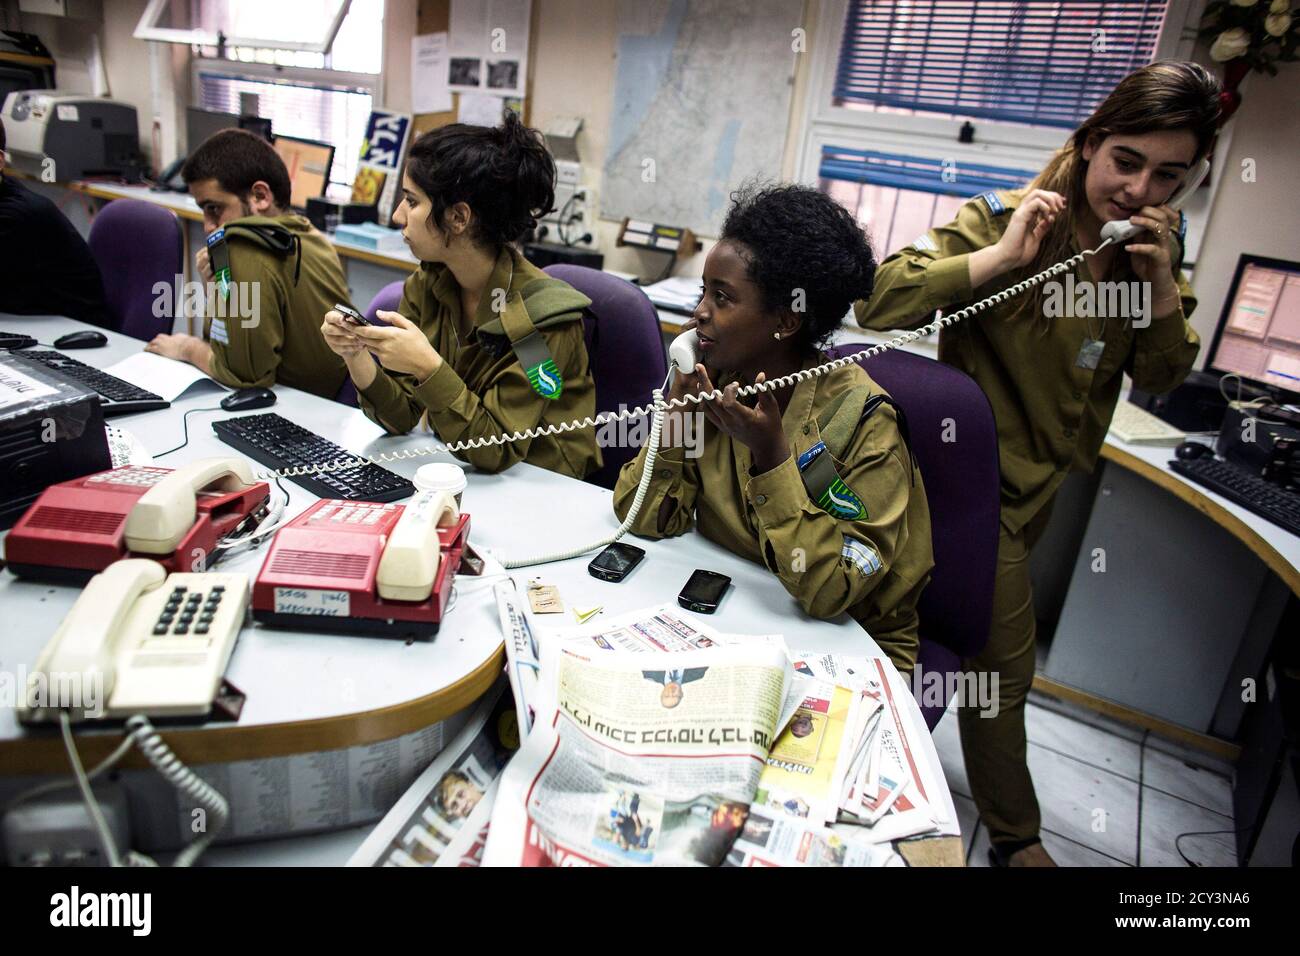 Israeli soldiers from Galei Tzahal, the Israeli army radio station, work in  the newsroom at the station's studios in Jaffa, south of central Tel Aviv  November 10, 2013. The Israeli military operates